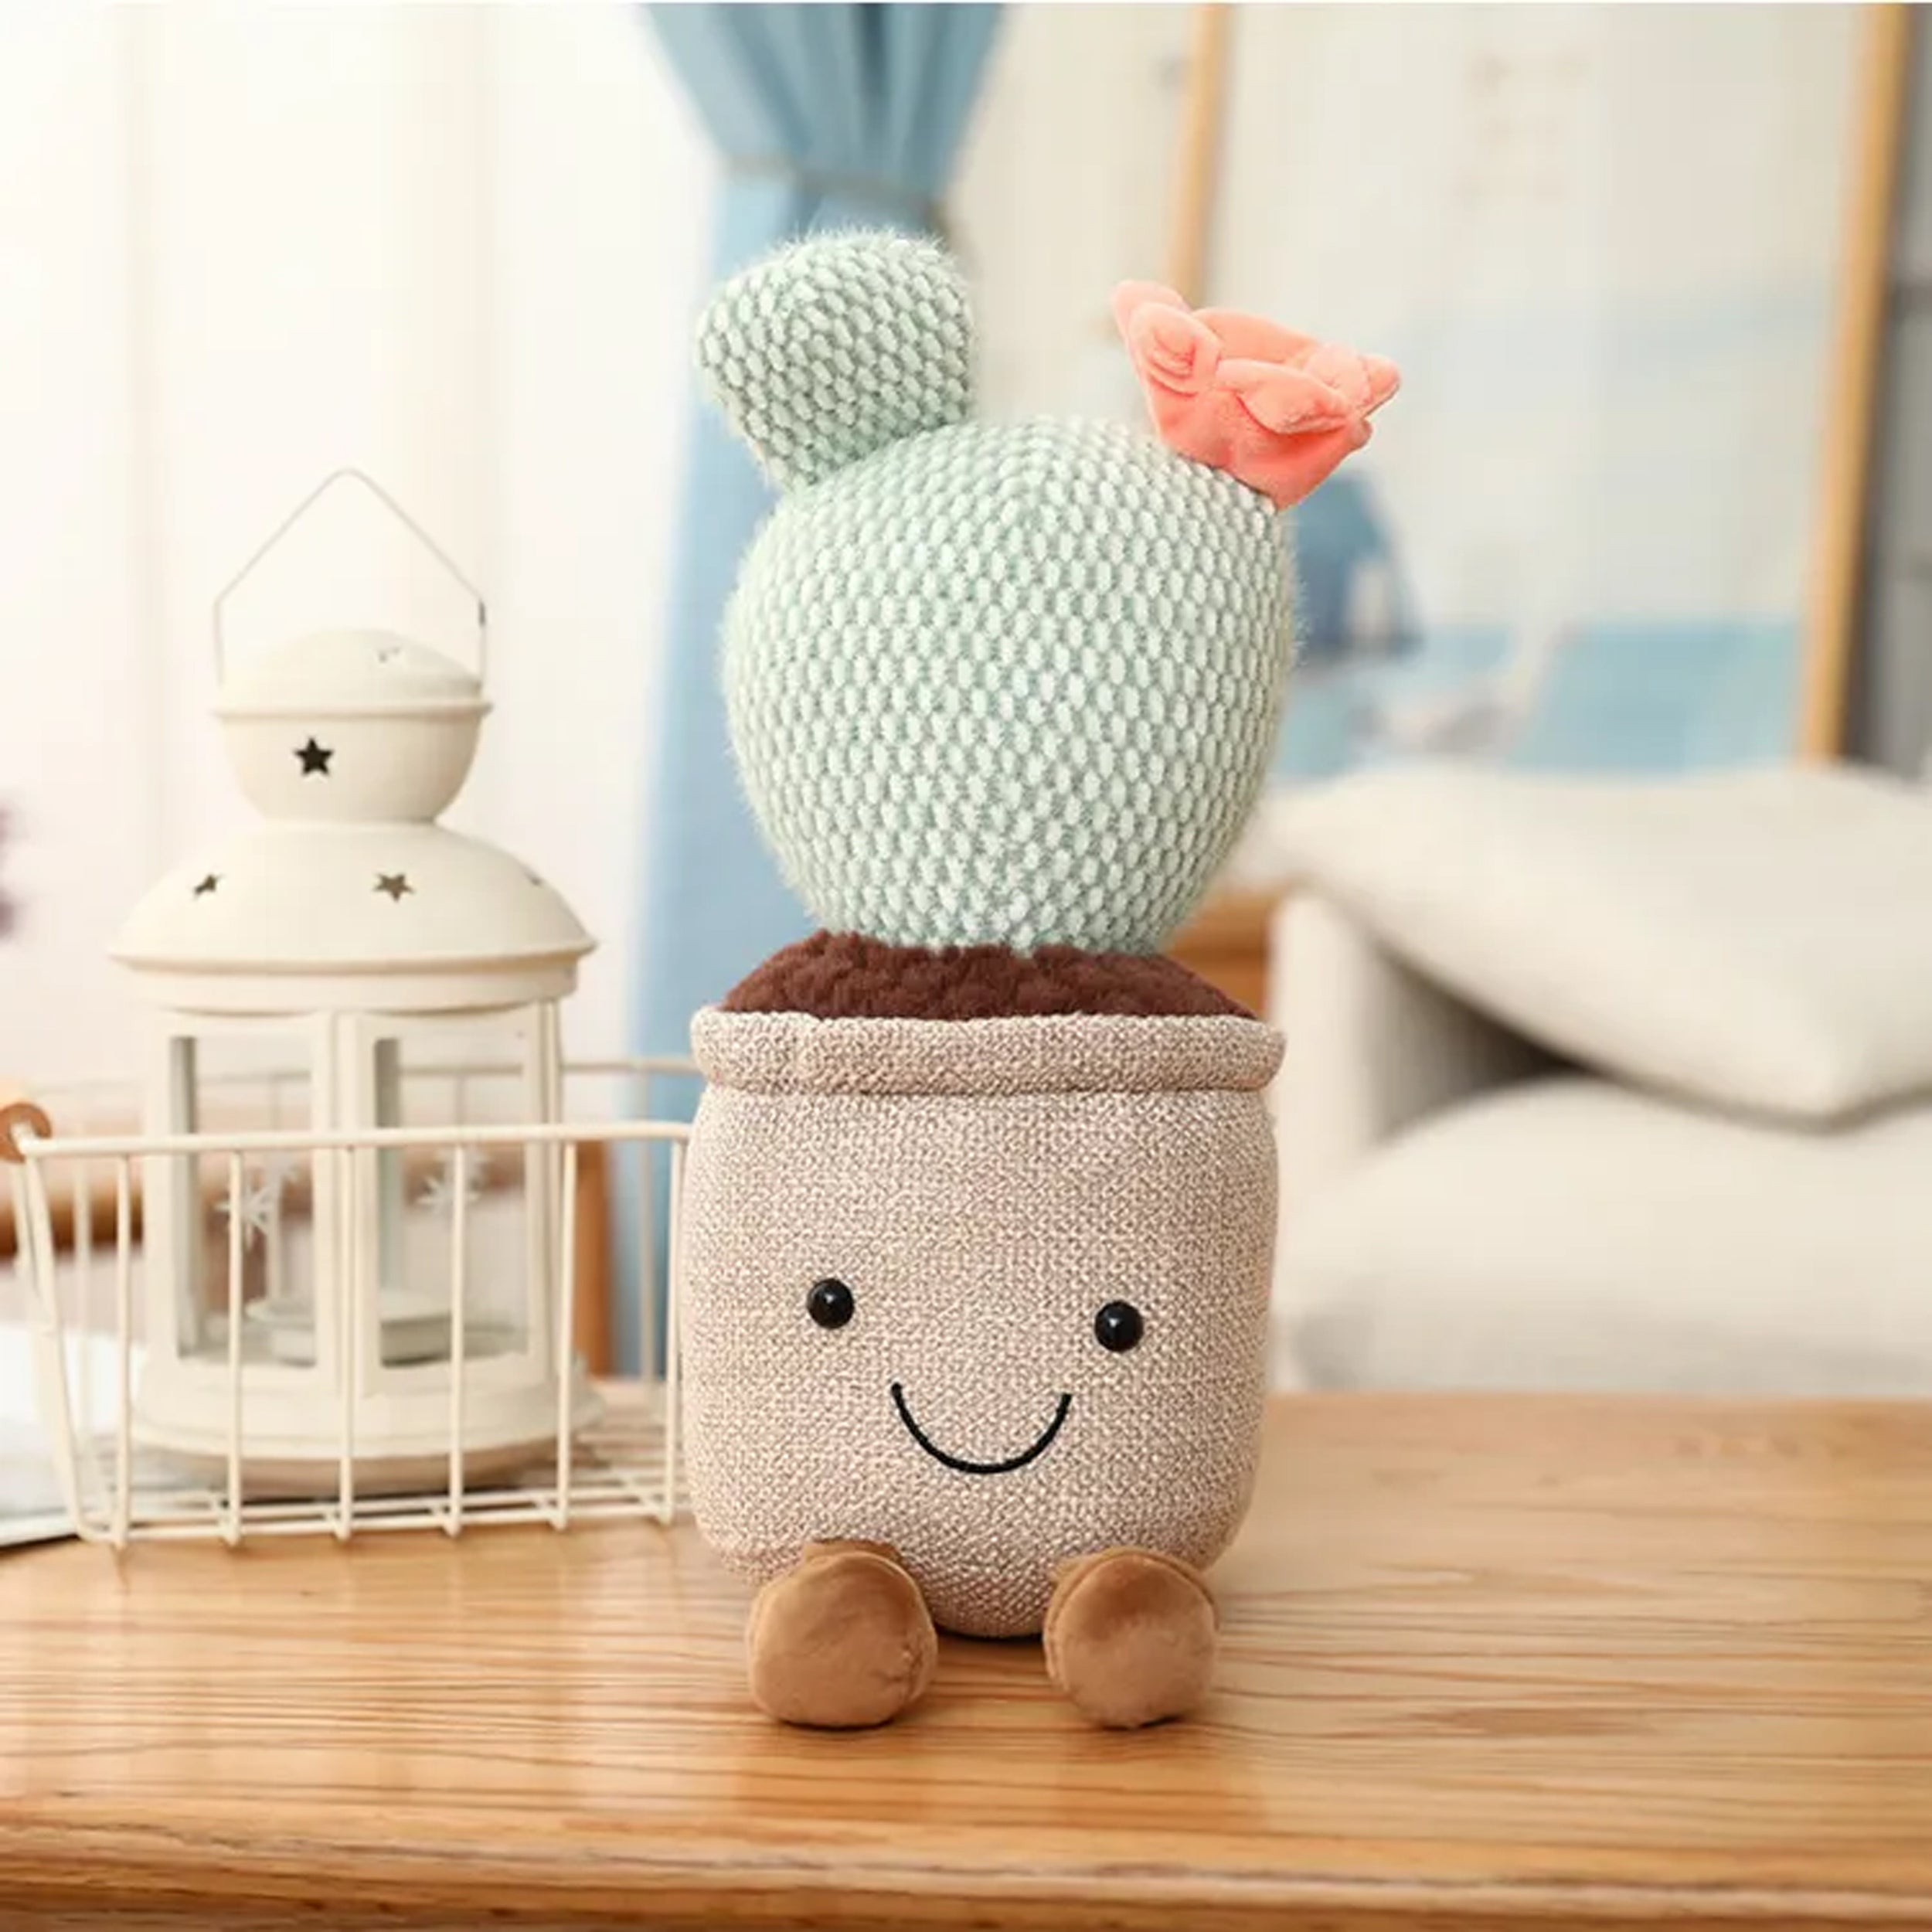 Artificial Plants Cactus Plush Toy with Pots - Perfect for Decorating Your Home